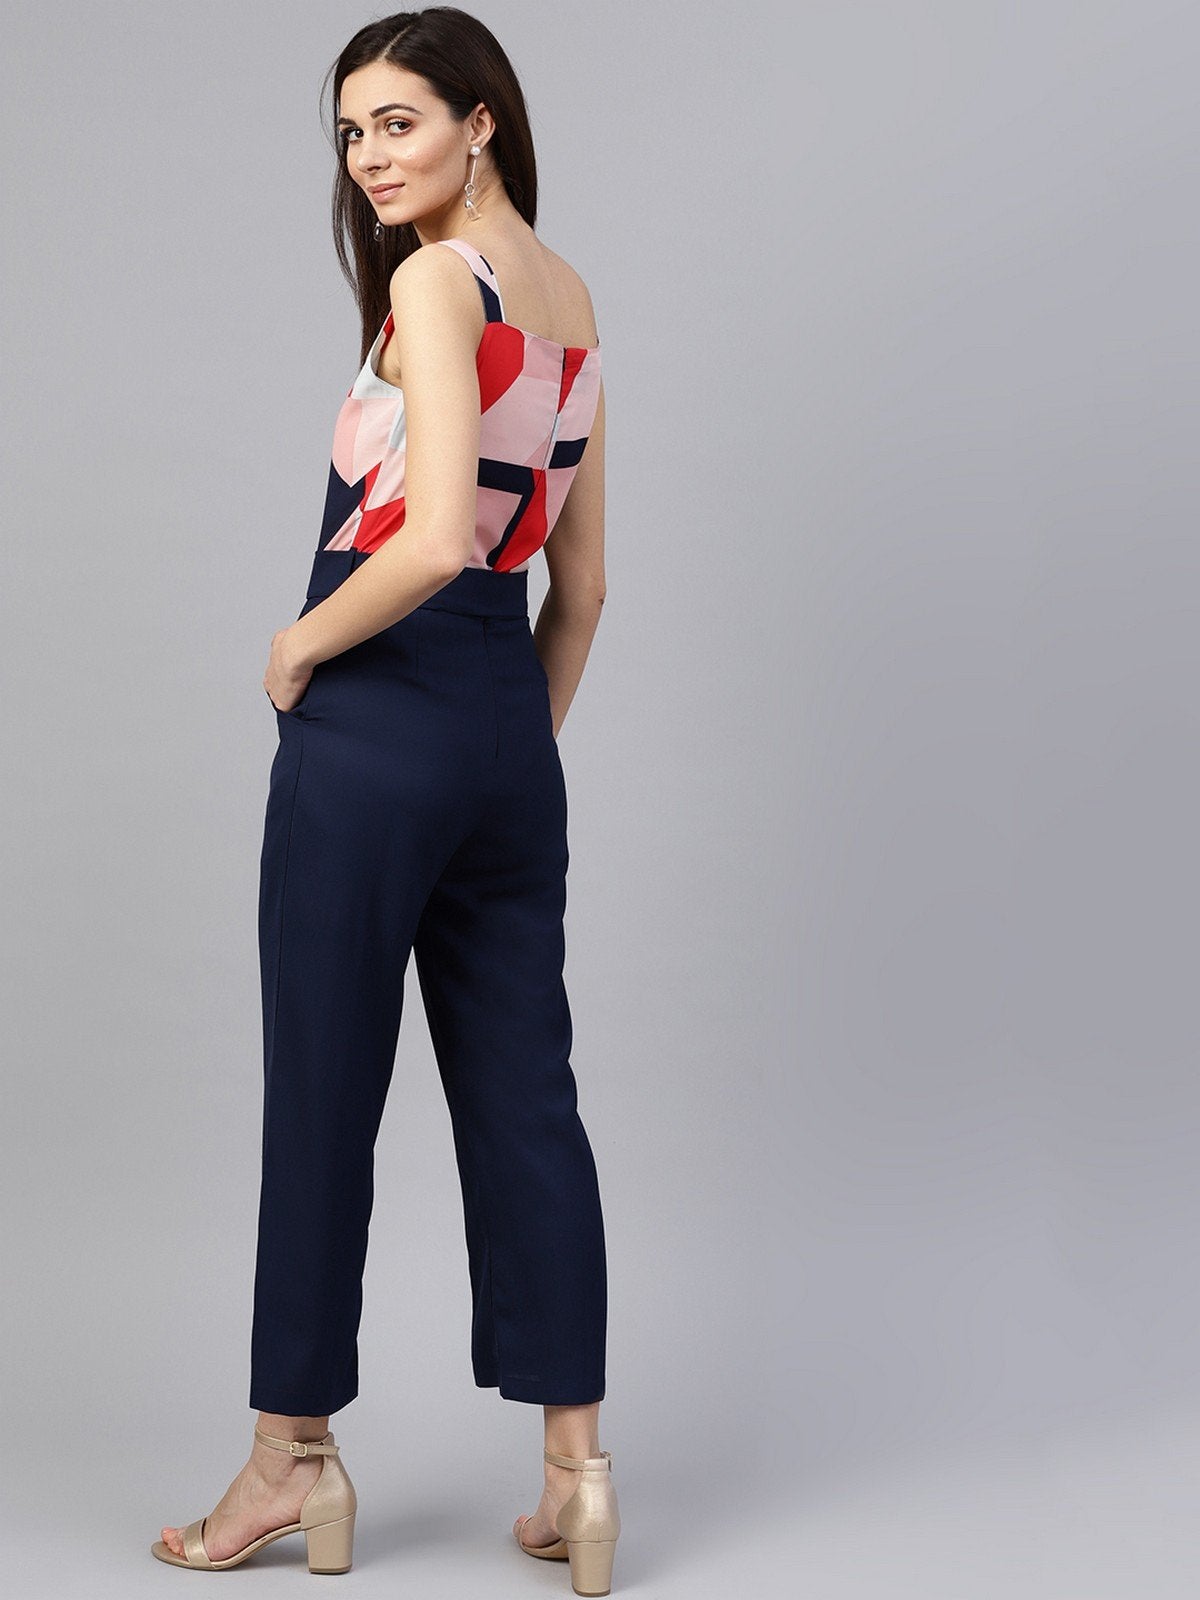 Women's Pink Abstract Print Jumpsuit - Pannkh